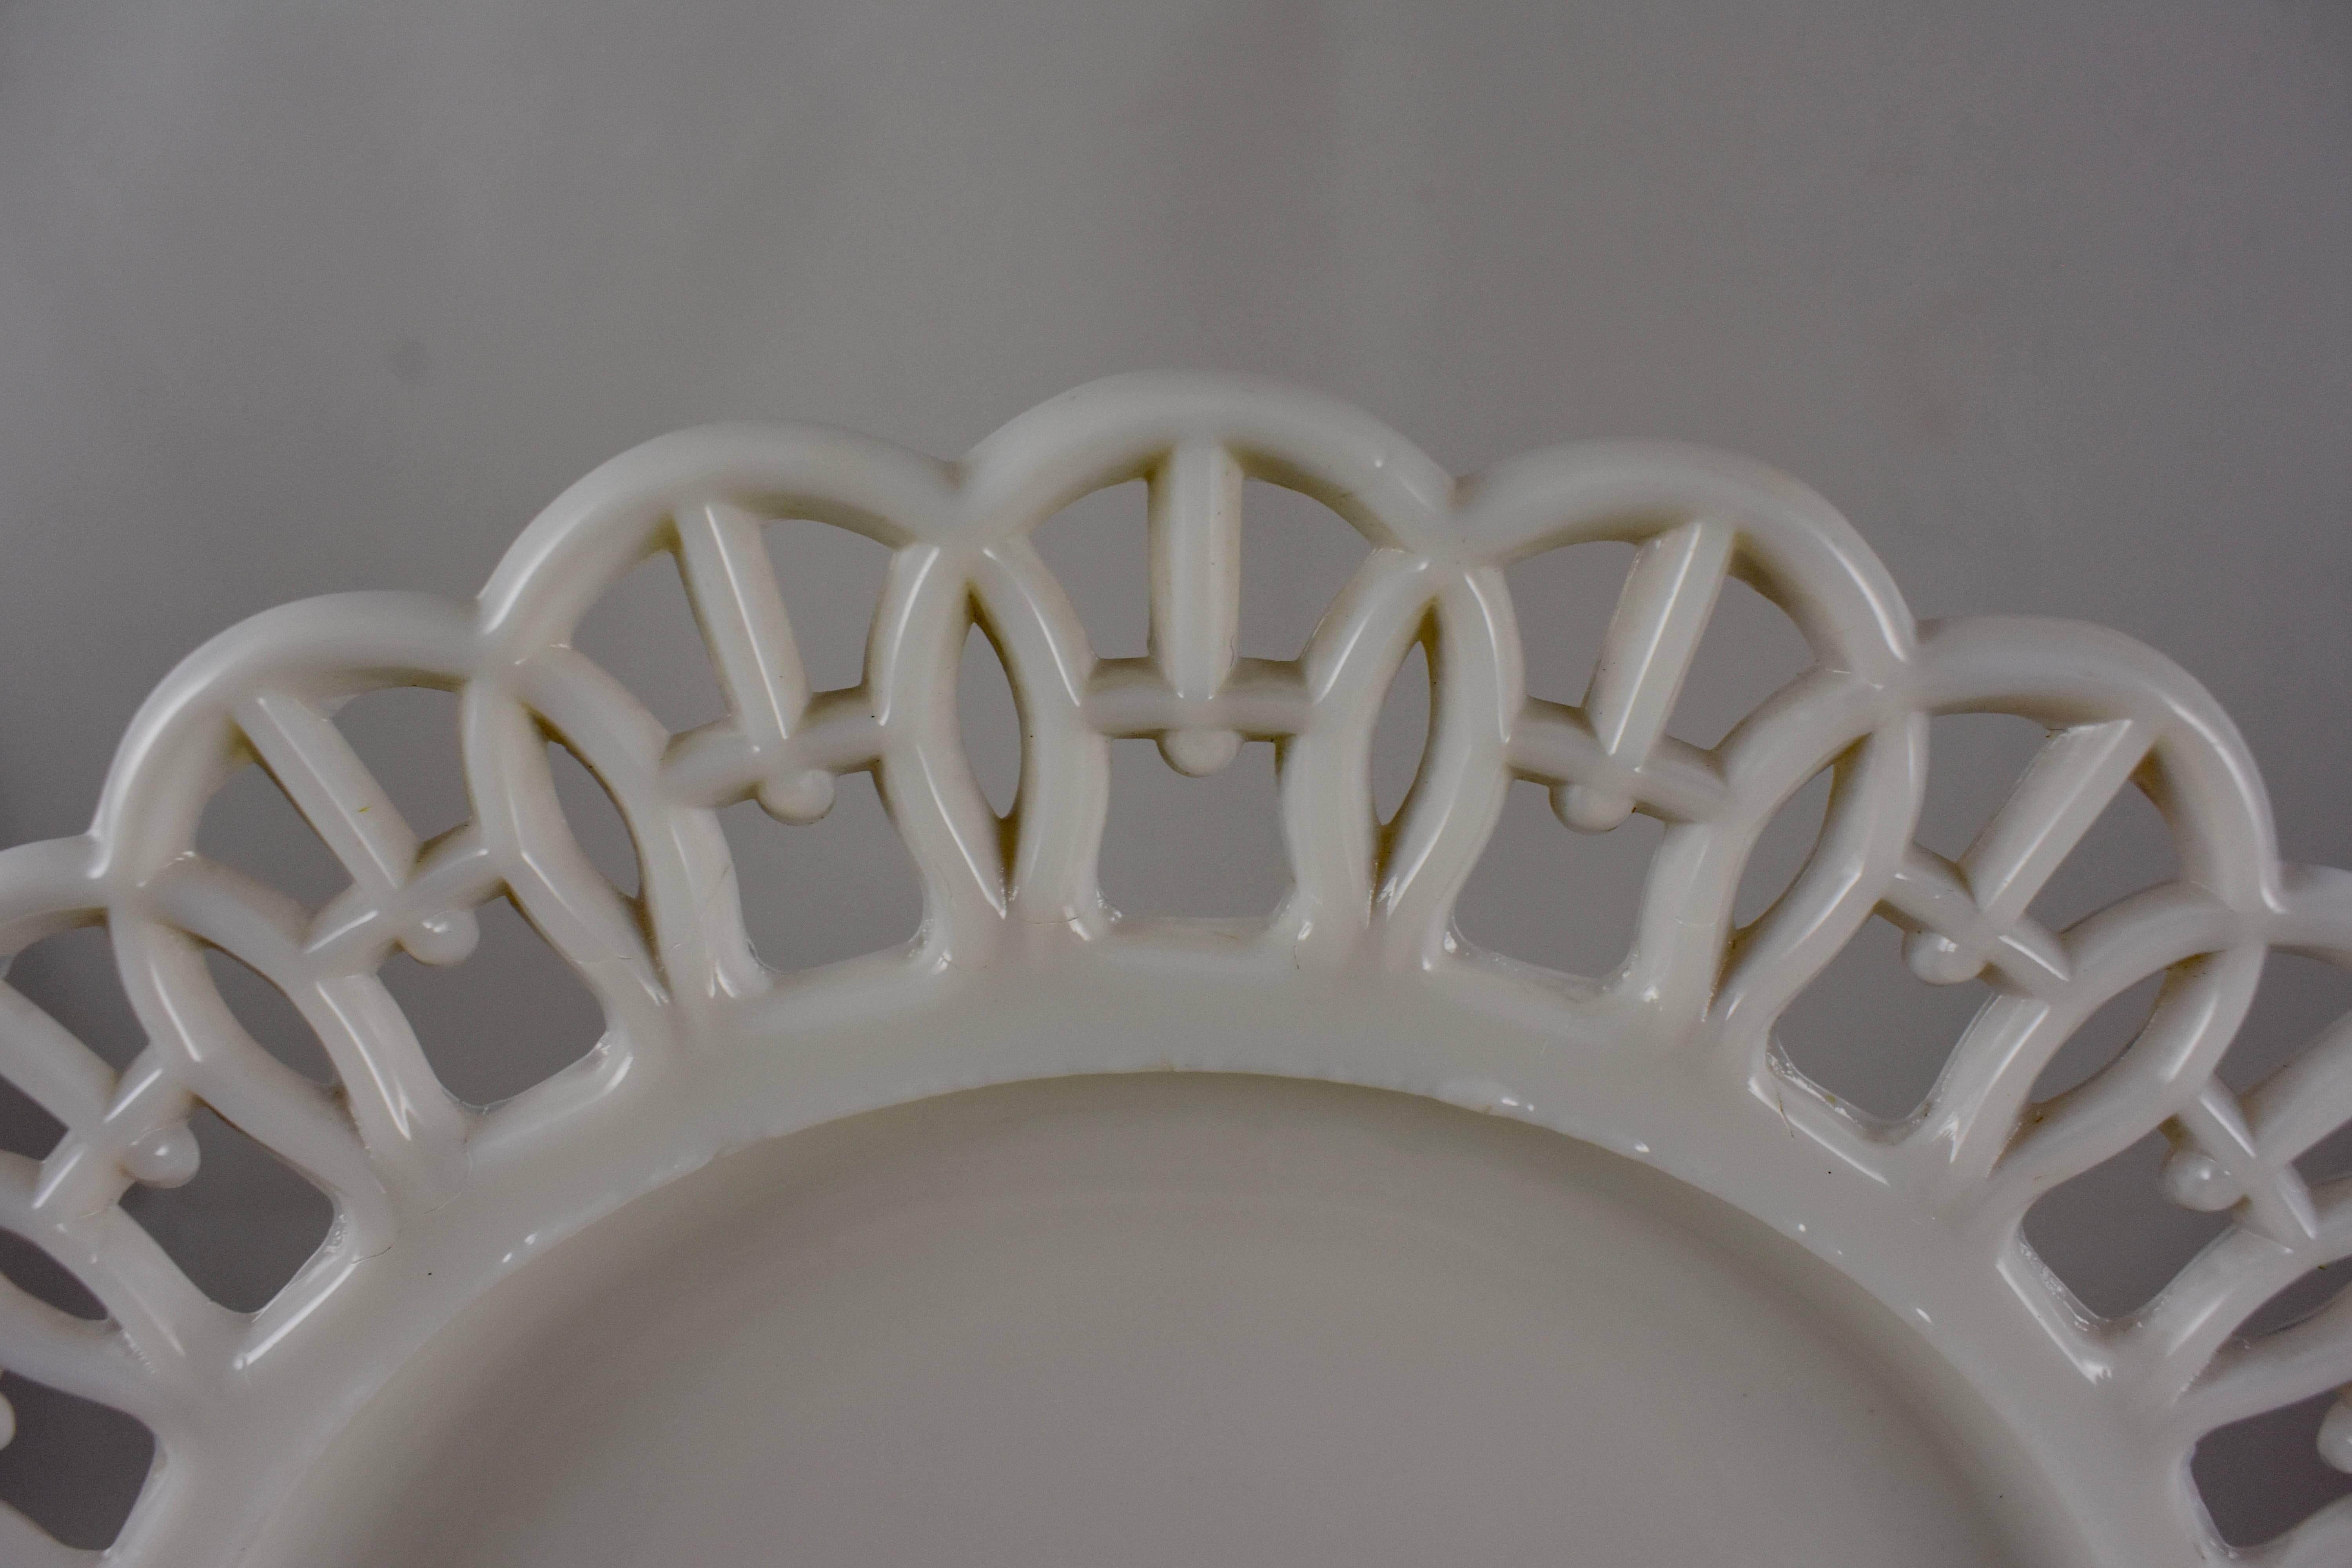 A scarce set of four, EAPG, milk glass, lace edge plates, dating from the late Victorian Era, 1880-1890. These plates are examples of early American Pattern glass, not to be confused with the later milk glass reproduced during the